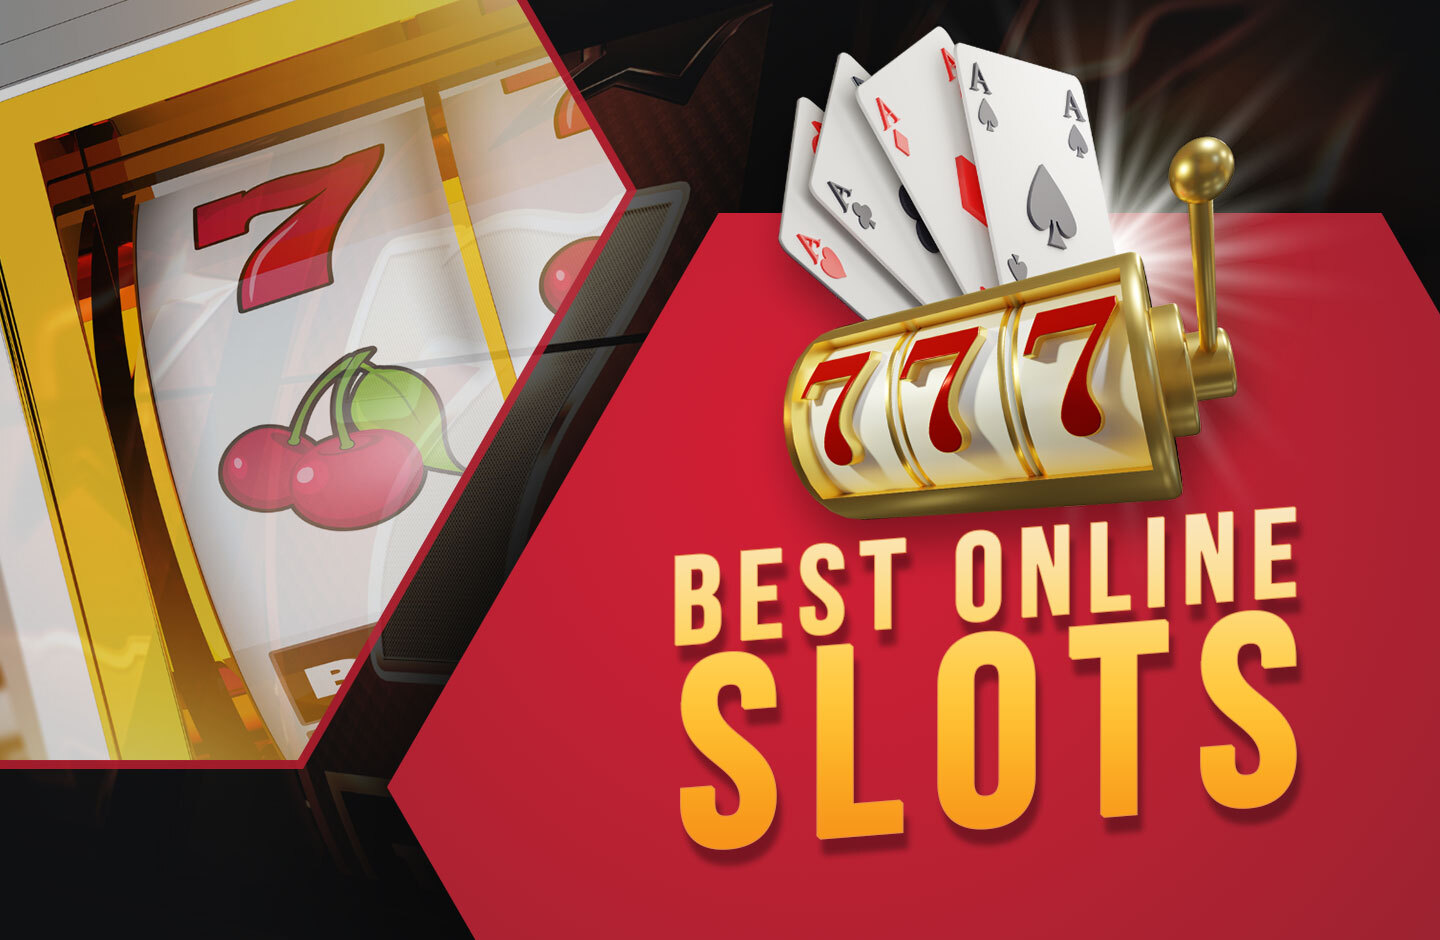 The Best Online Slots Gaming